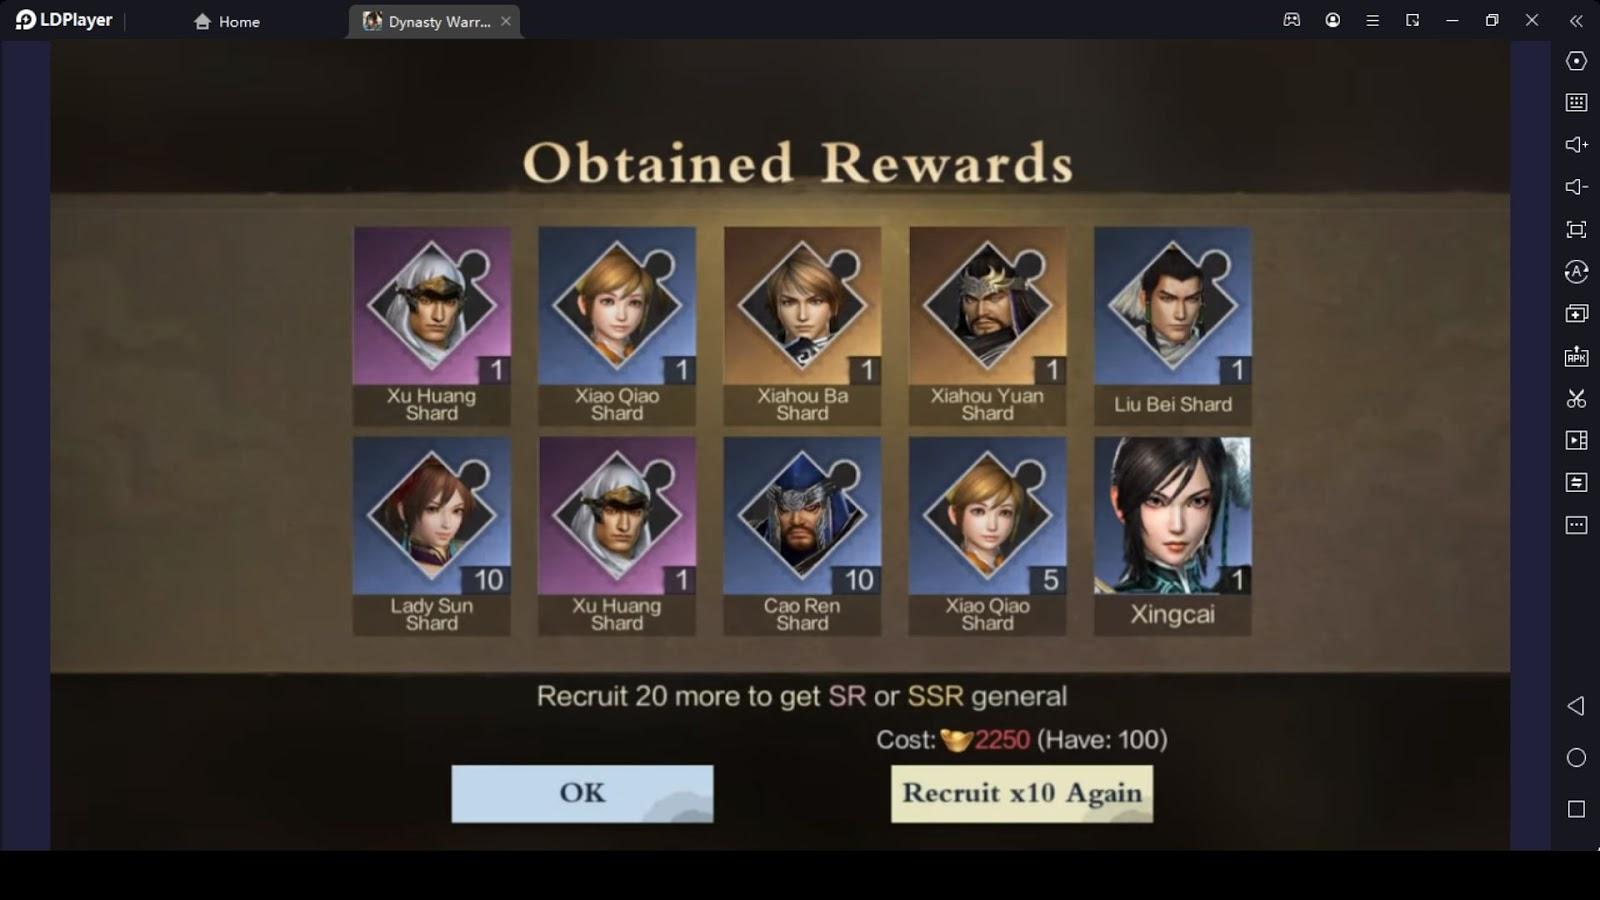 Dynasty Warriors: Overlords Reroll Steps